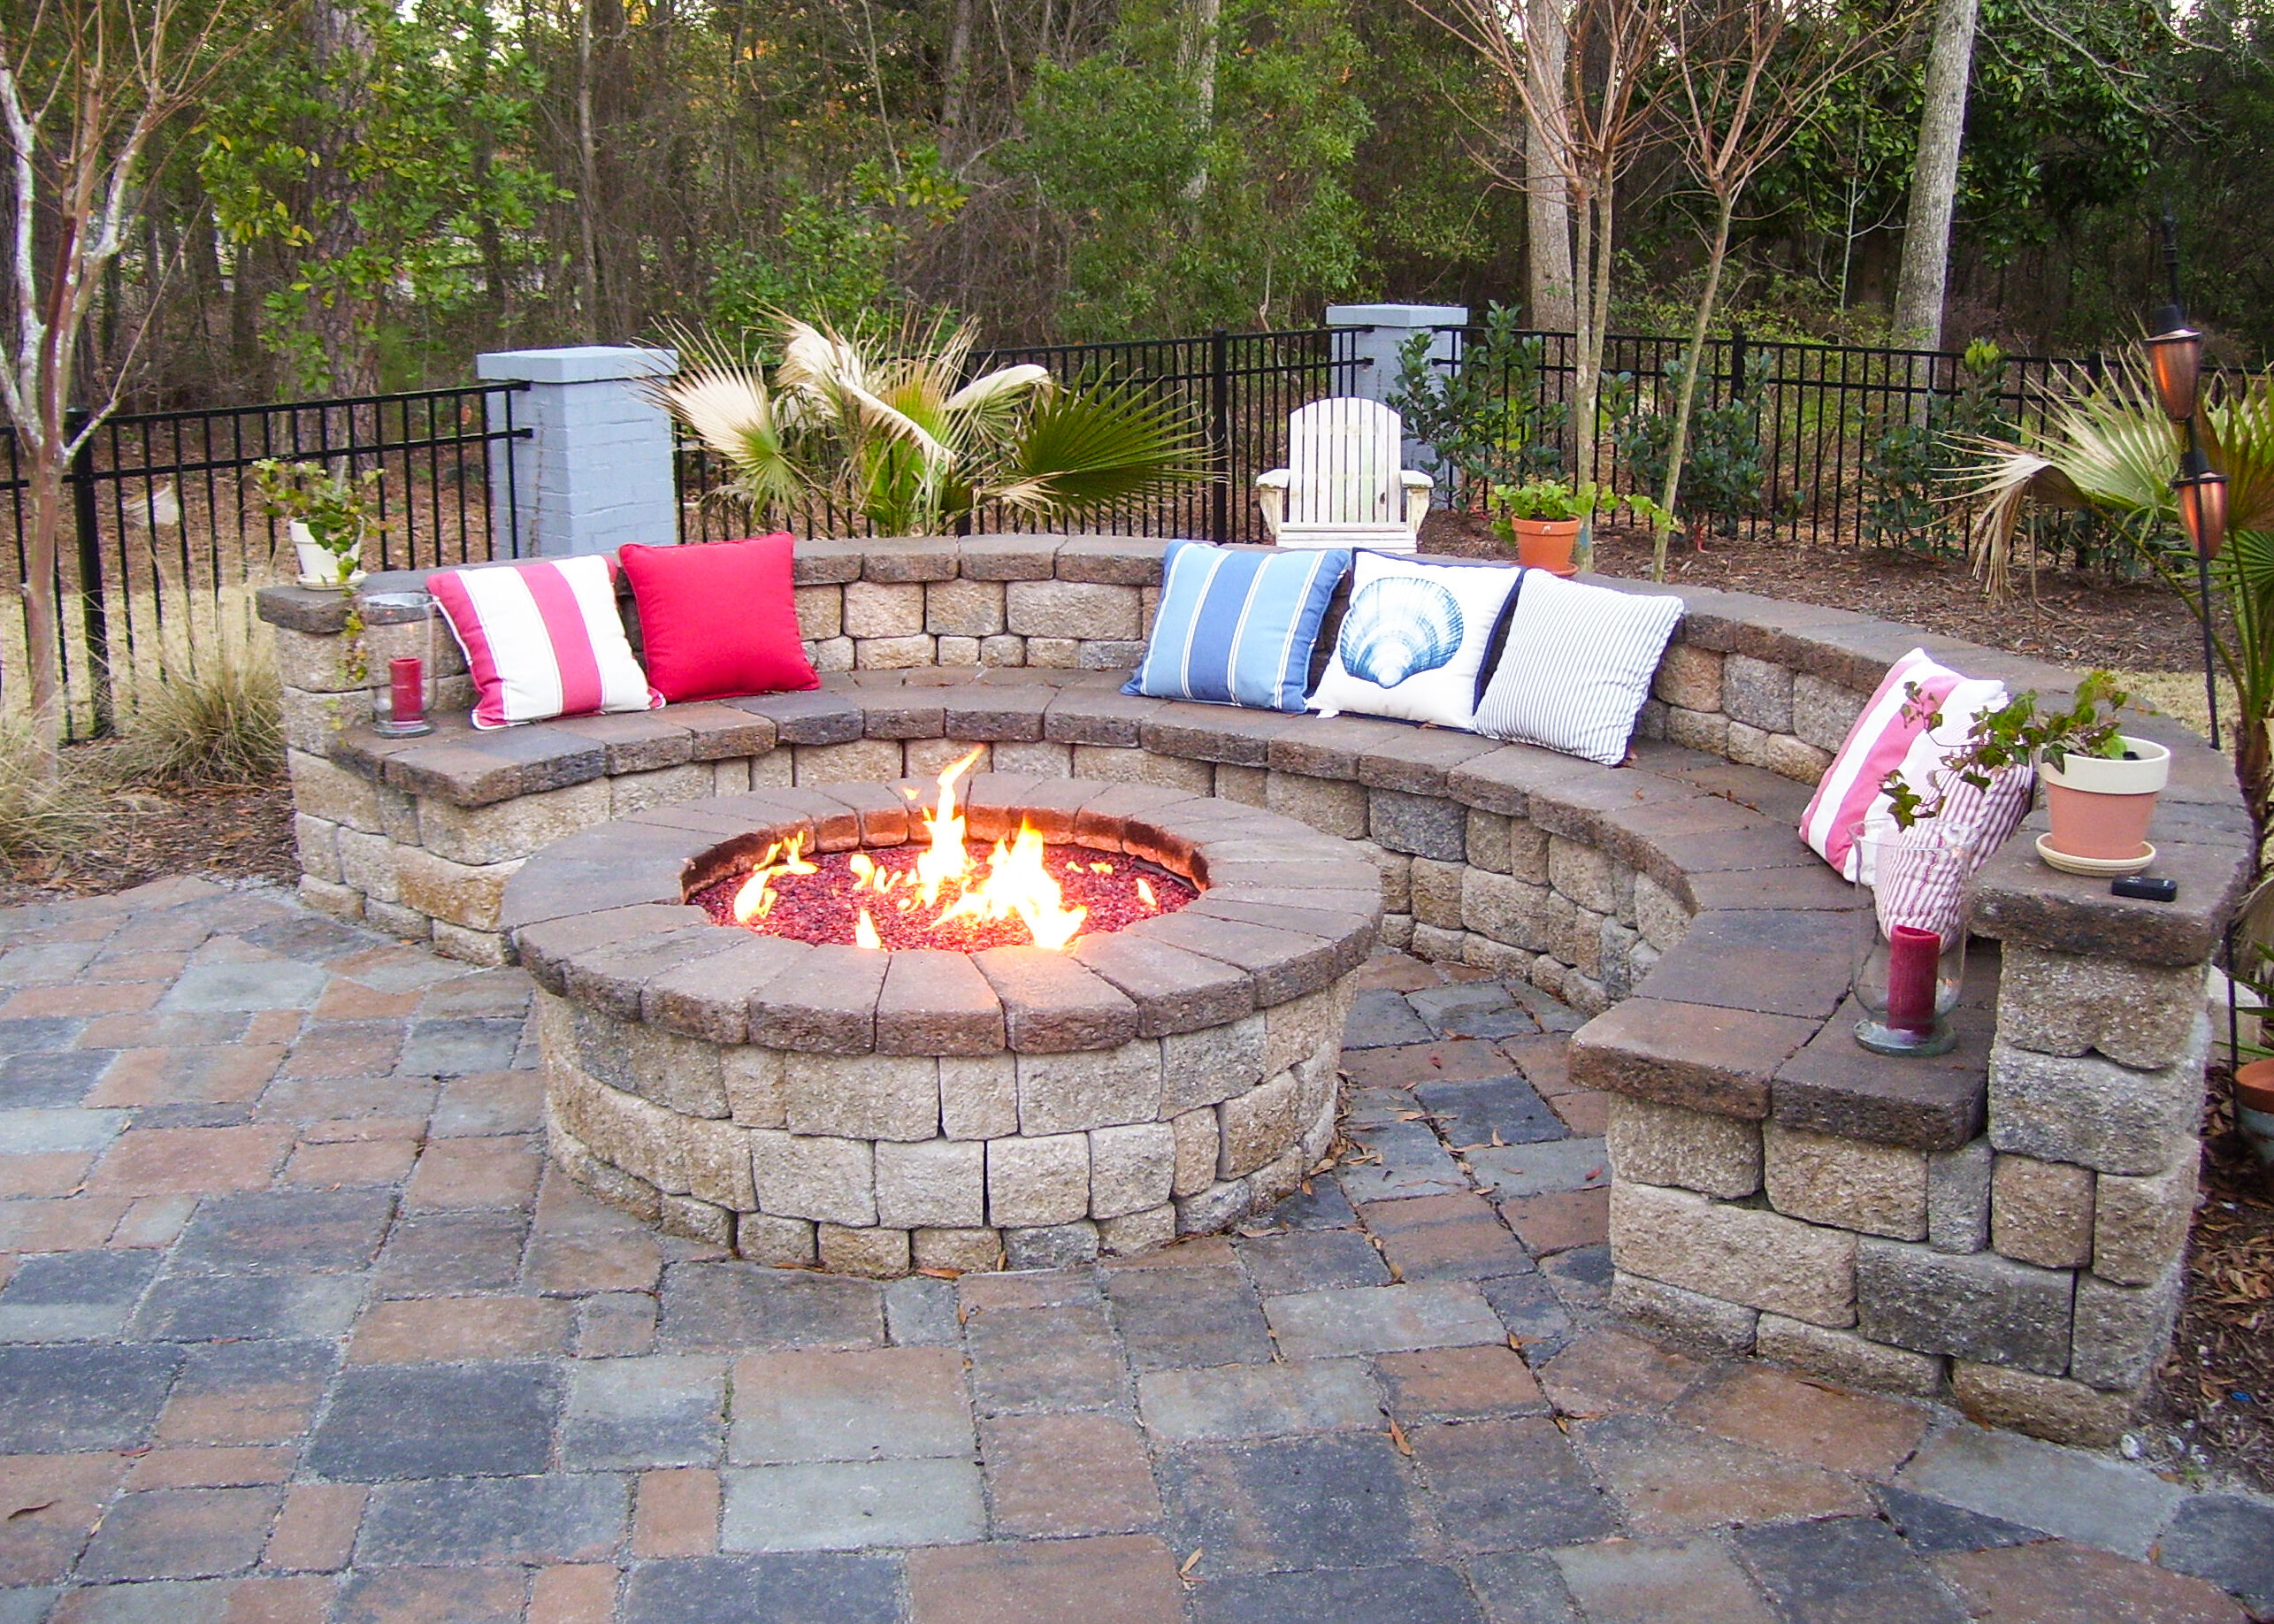 3 Easy Diy Fire Pit Ideas, Outdoor Fire Pit Enclosures